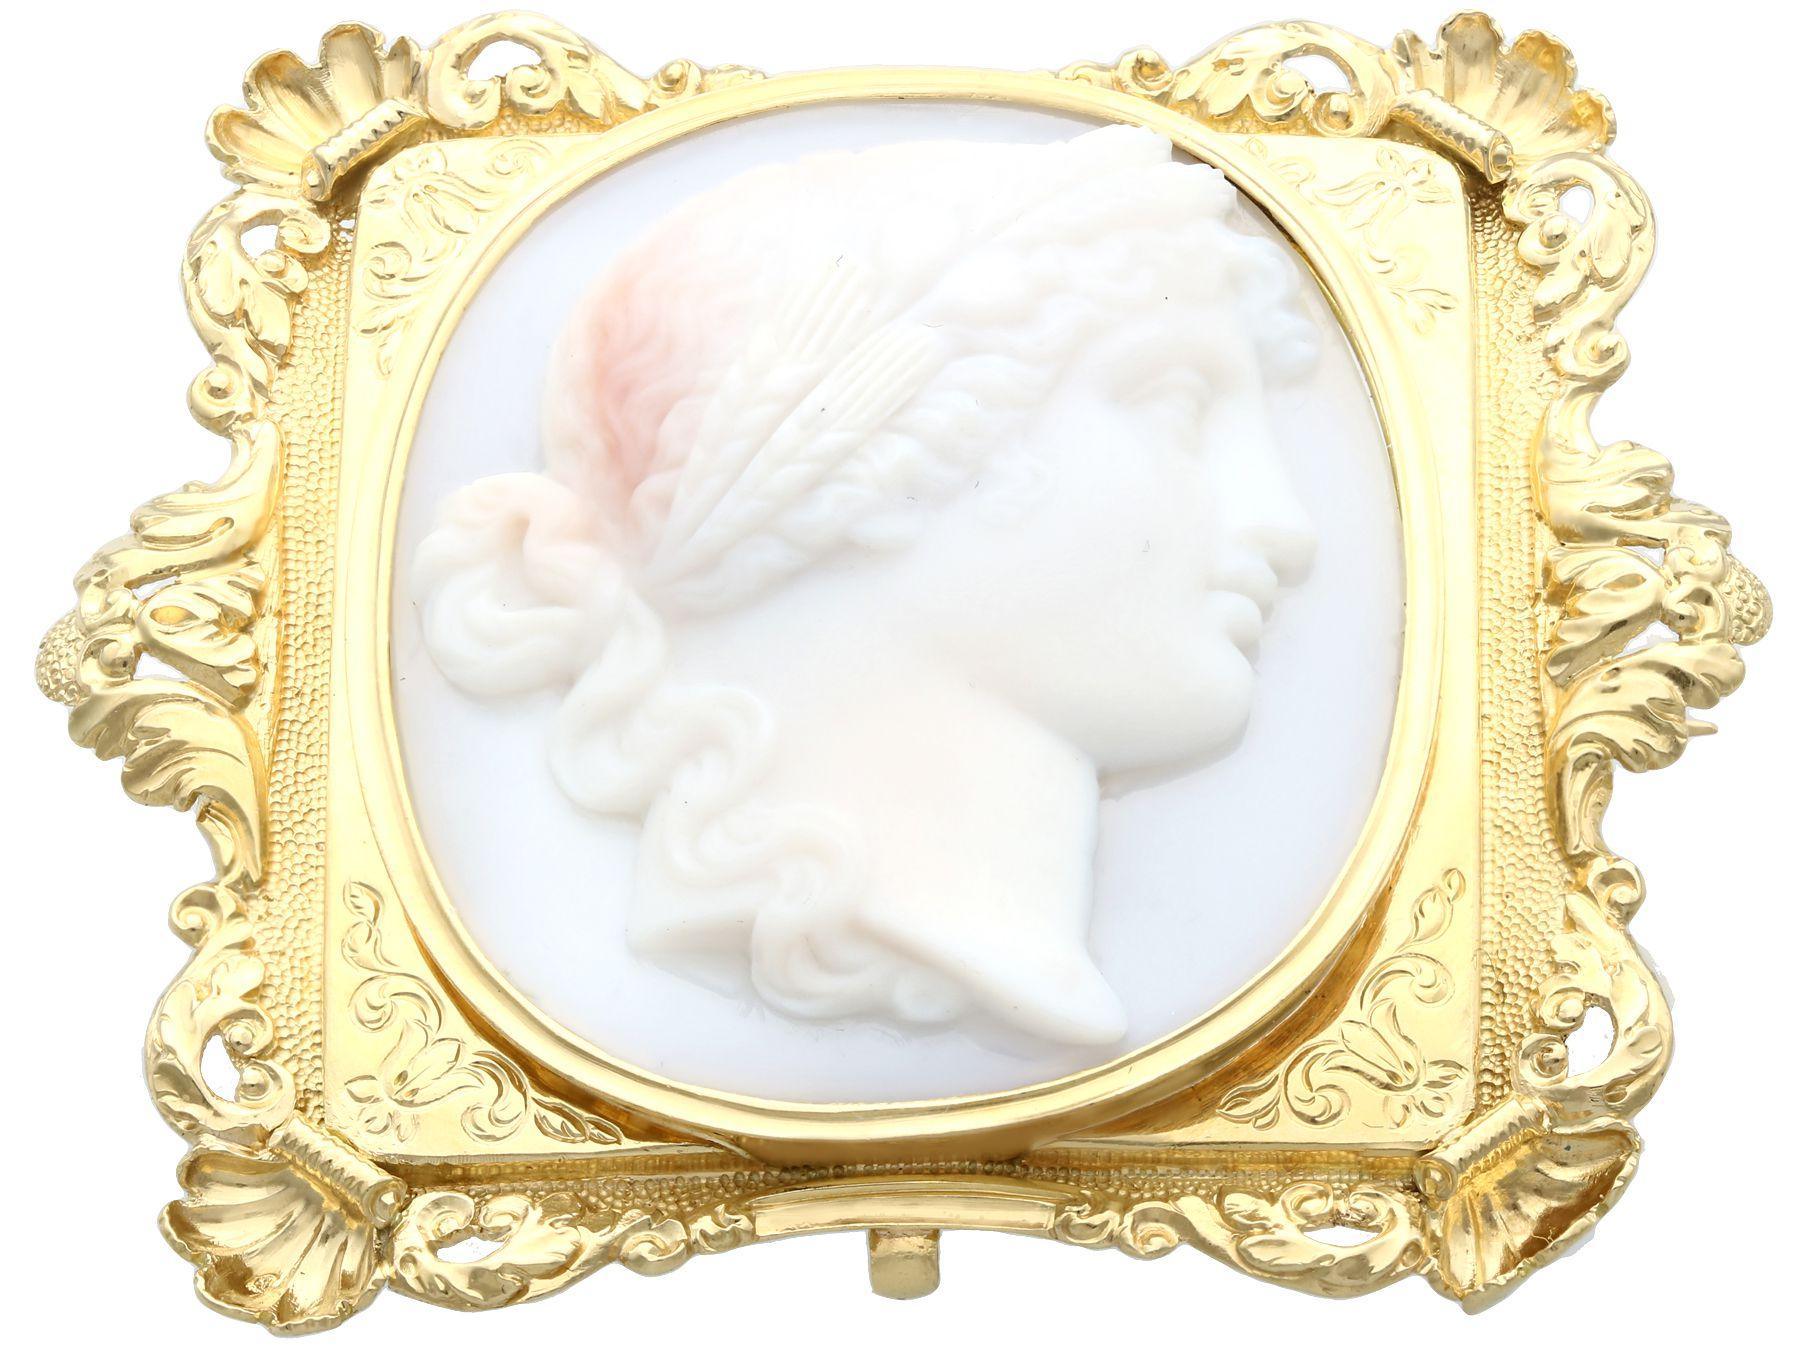 Antique Carved Hardstone and Yellow Gold Cameo Brooch, circa 1860 In Excellent Condition For Sale In Jesmond, Newcastle Upon Tyne